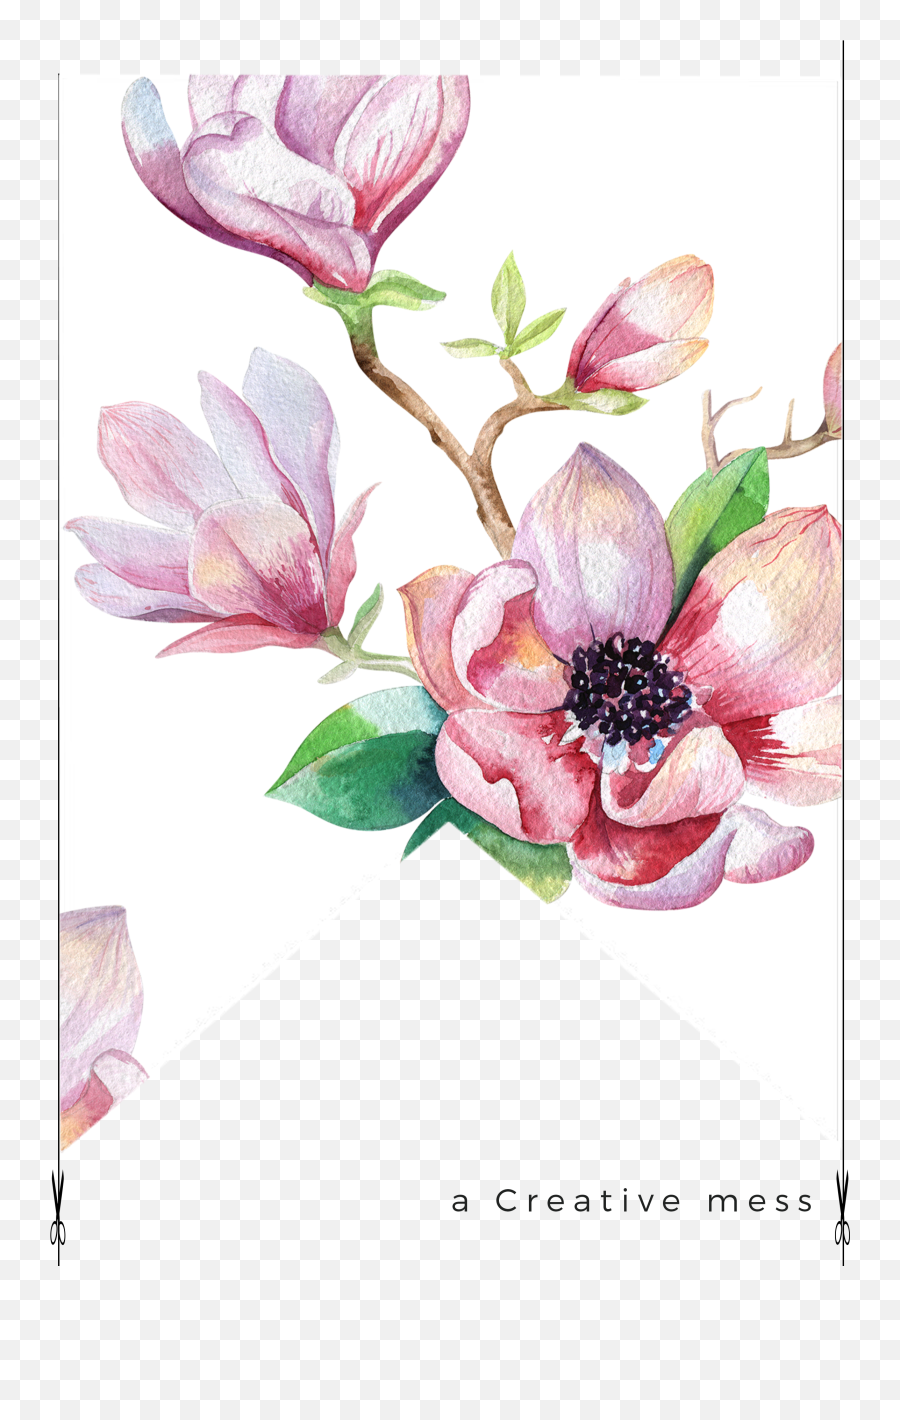 Watercolor Floral Png Image - Flower And Leaf Watercolour,Watercolor Floral Png